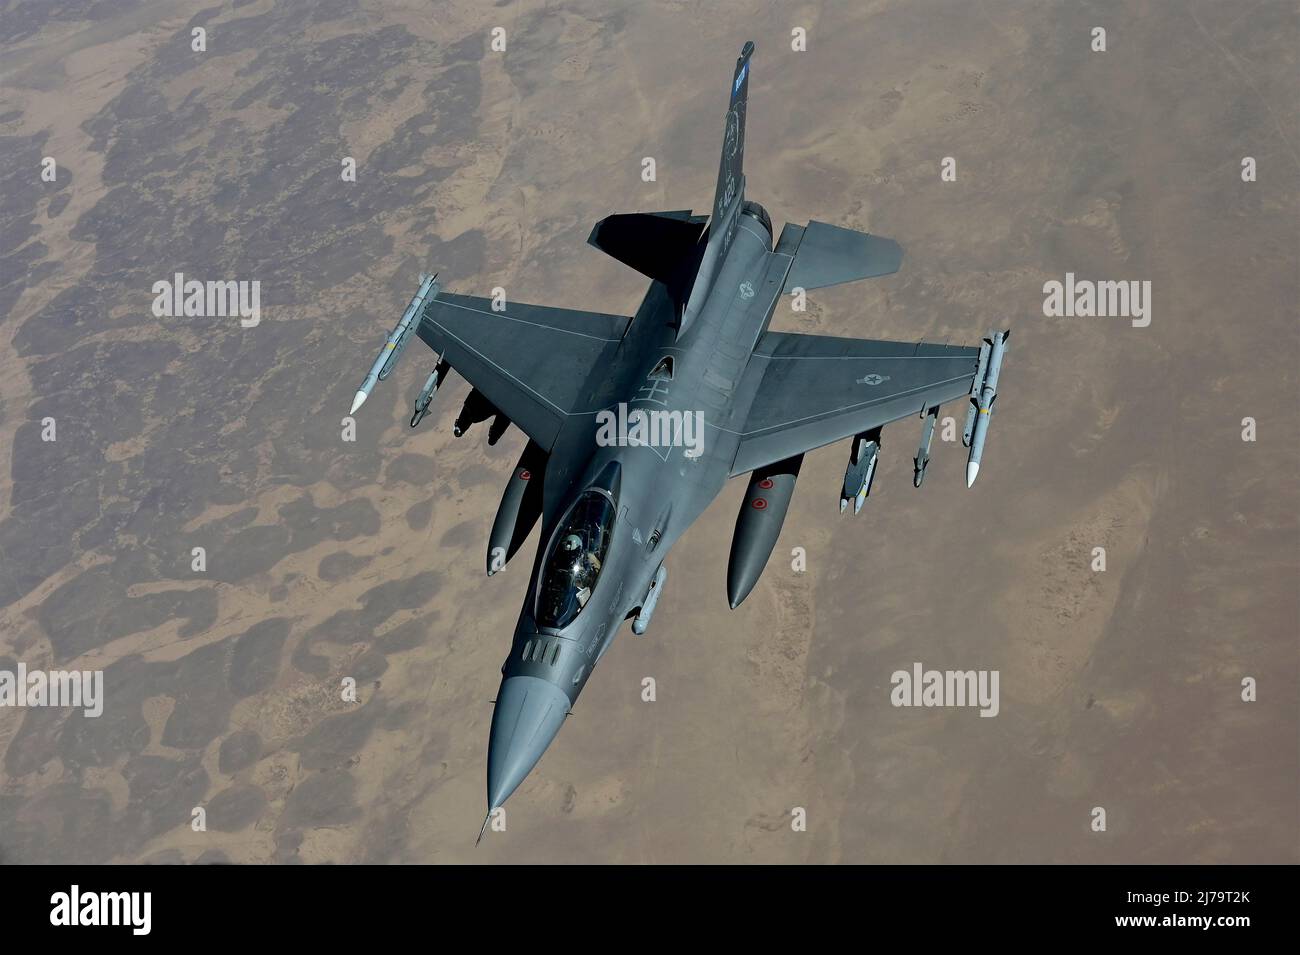 Al Kharj, Saudi Arabia. 05 May, 2022. A U.S. Air Force F-16C Fighting Falcon fighter jet, assigned to the 179th Expeditionary Fighter Squadron, approaches a KC-135R Stratotanker refueling aircraft over Prince Sultan Air Base, May 5, 2022 near Al Kharj, Saudi Arabia. Credit: MSgt. Matthew Plew/U.S. Air Force/Alamy Live News Stock Photo